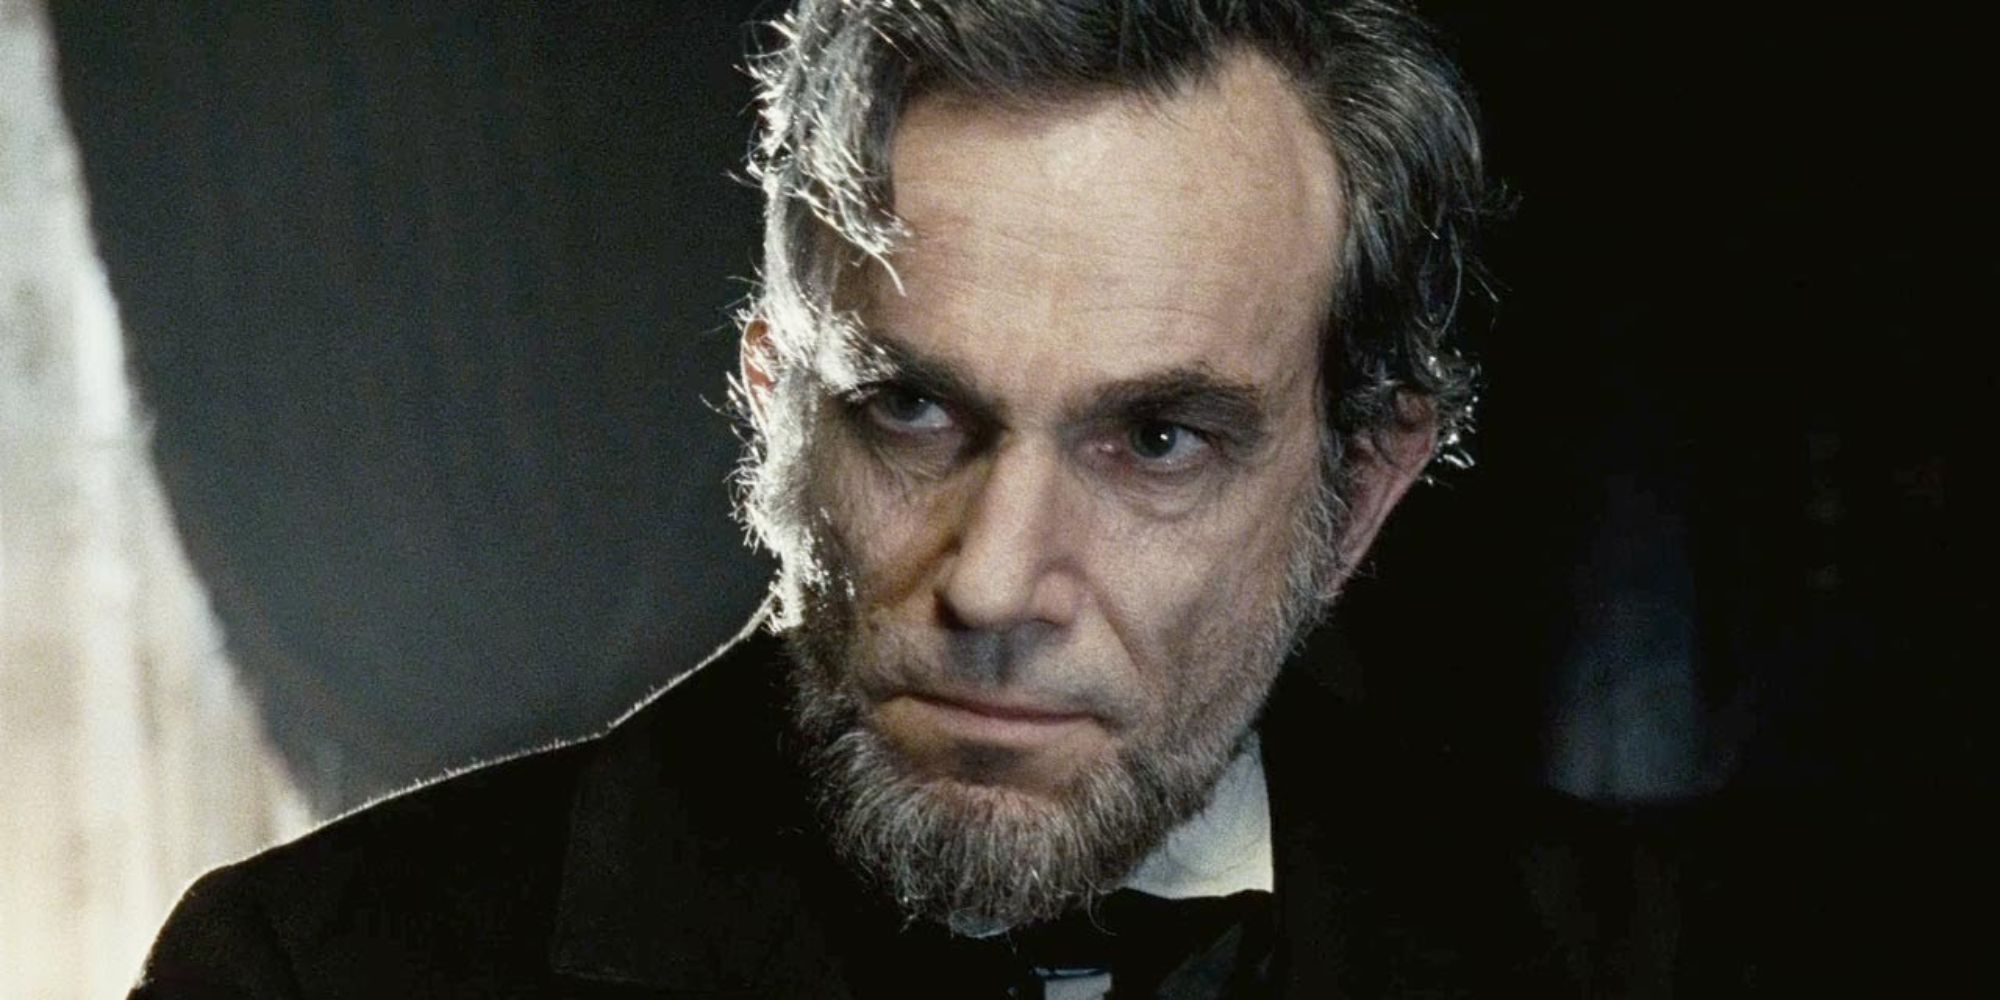 Daniel Day-Lewis as Abraham Lincoln looking intently at something off-camera in Lincoln.